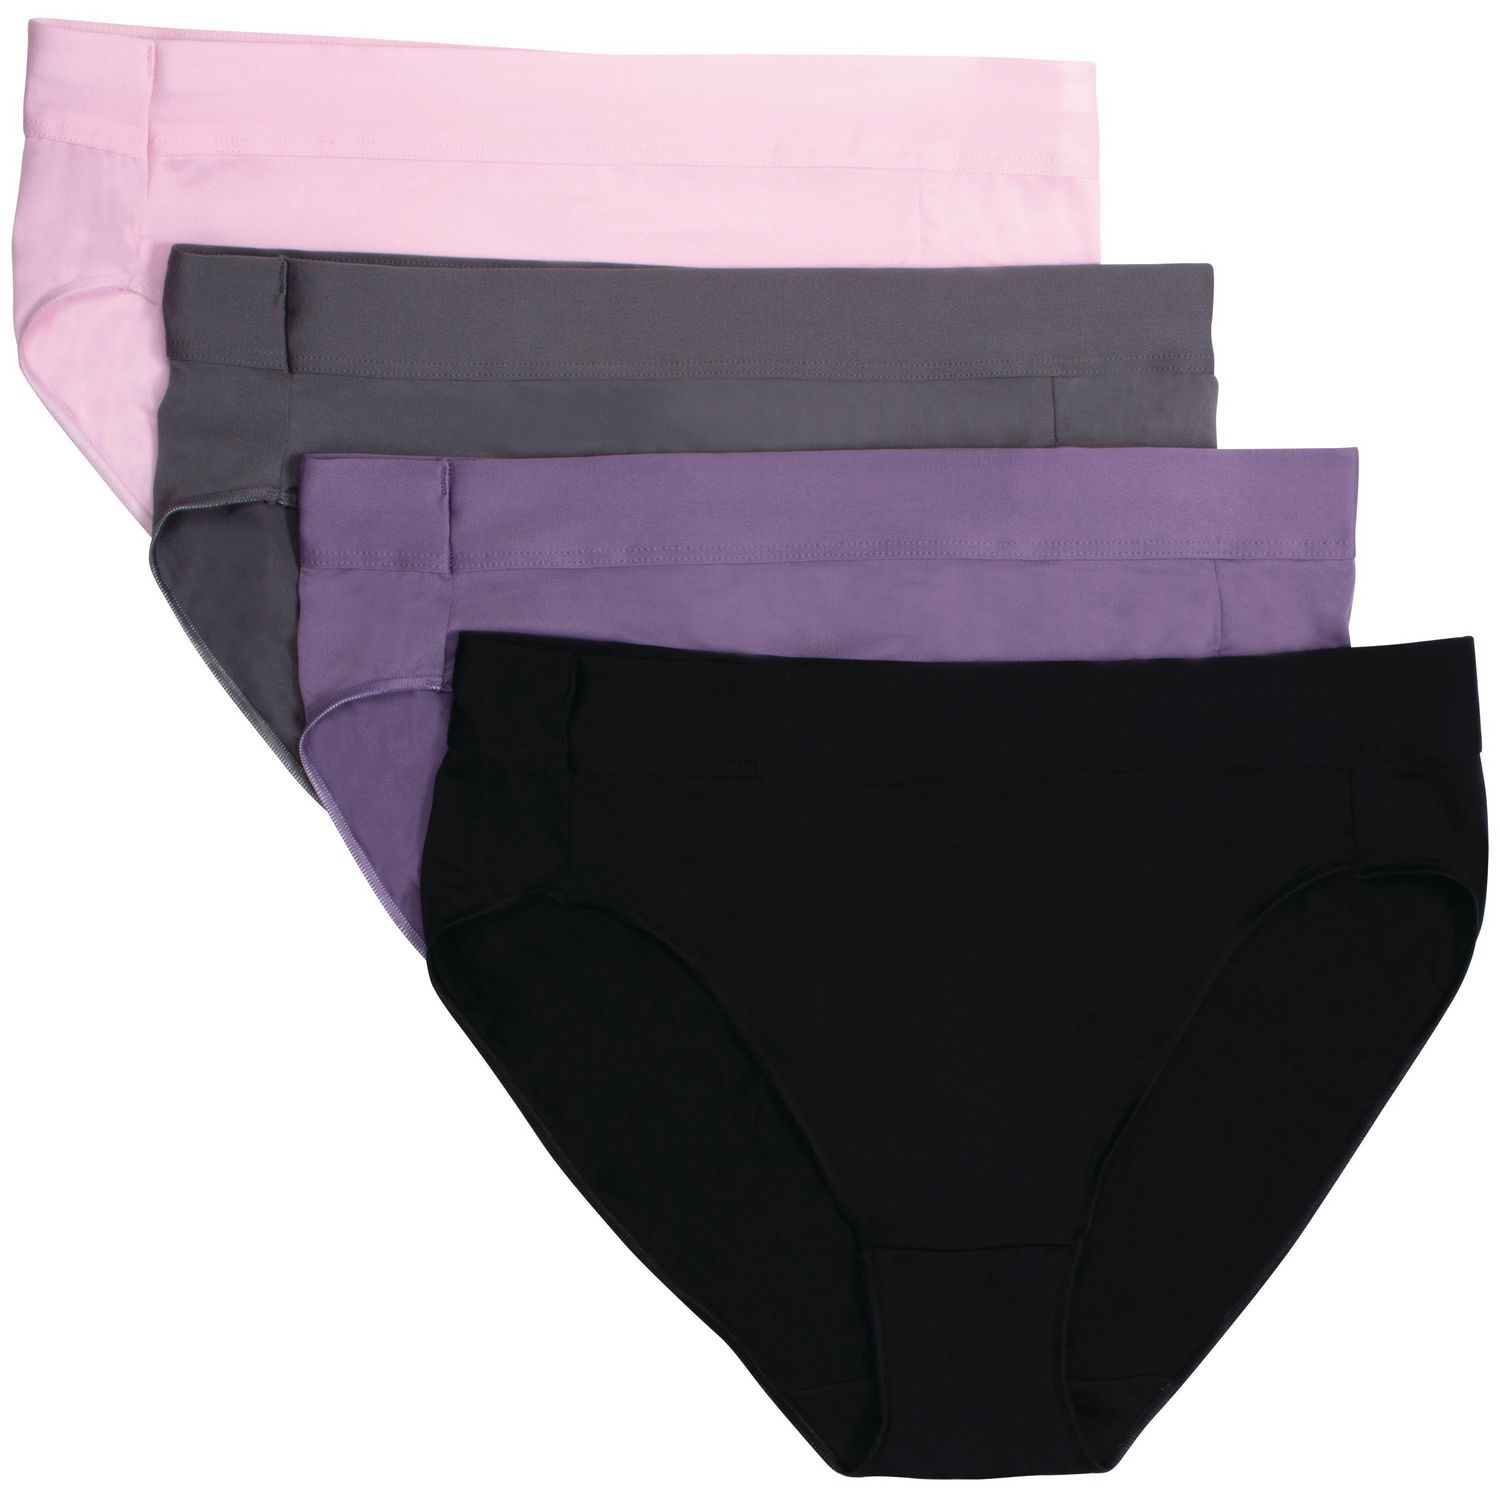 Hanes Womens Smoothing Brief With Tummy Control Panel 4-Pack, 2XL 